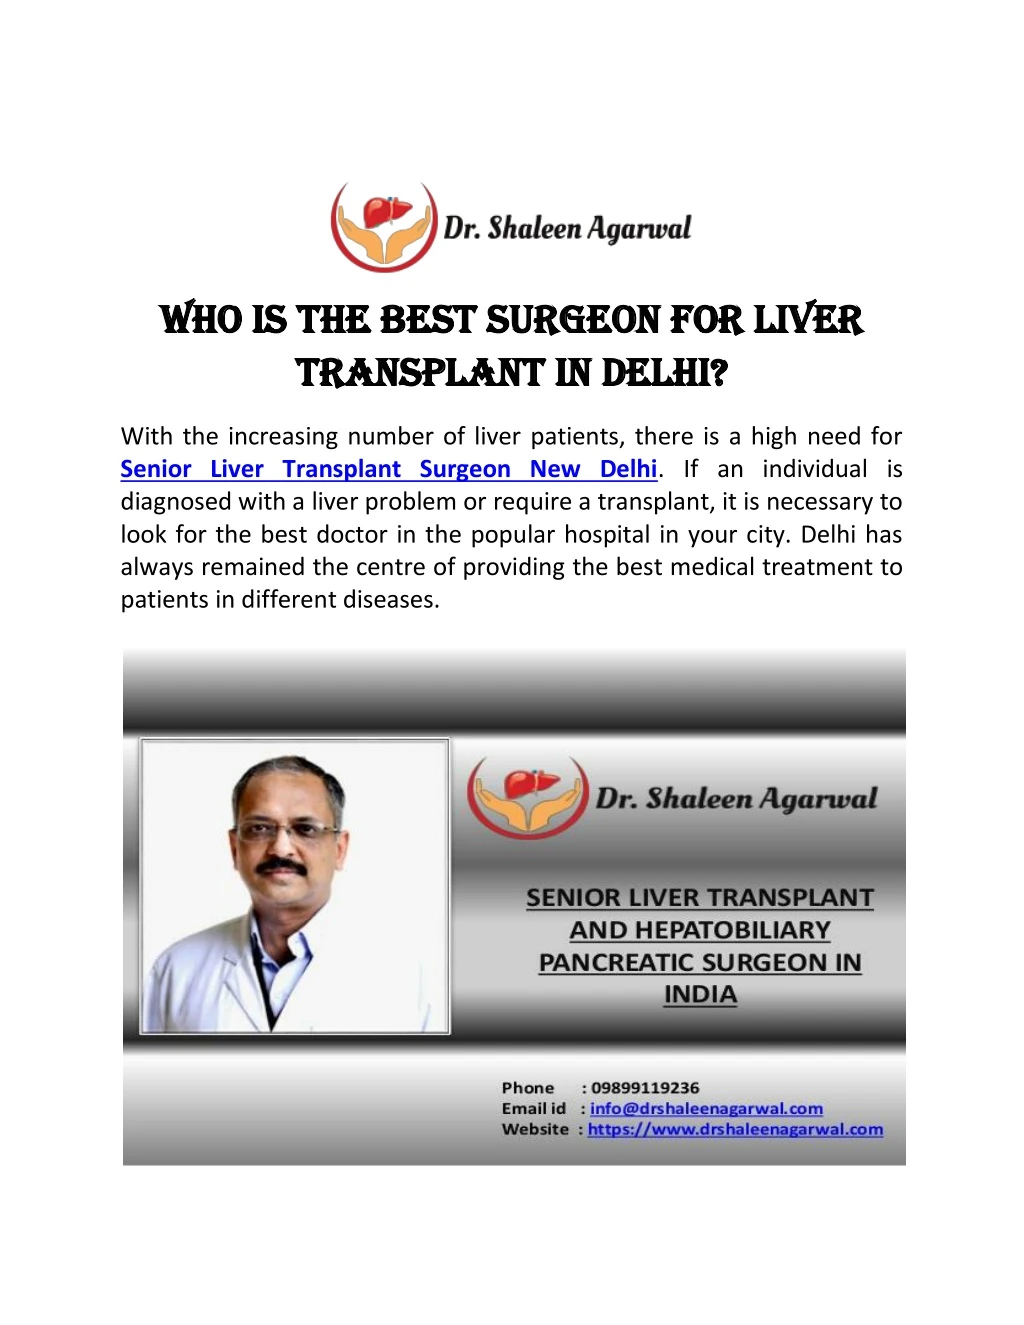 who is the best surgeon for liver who is the best